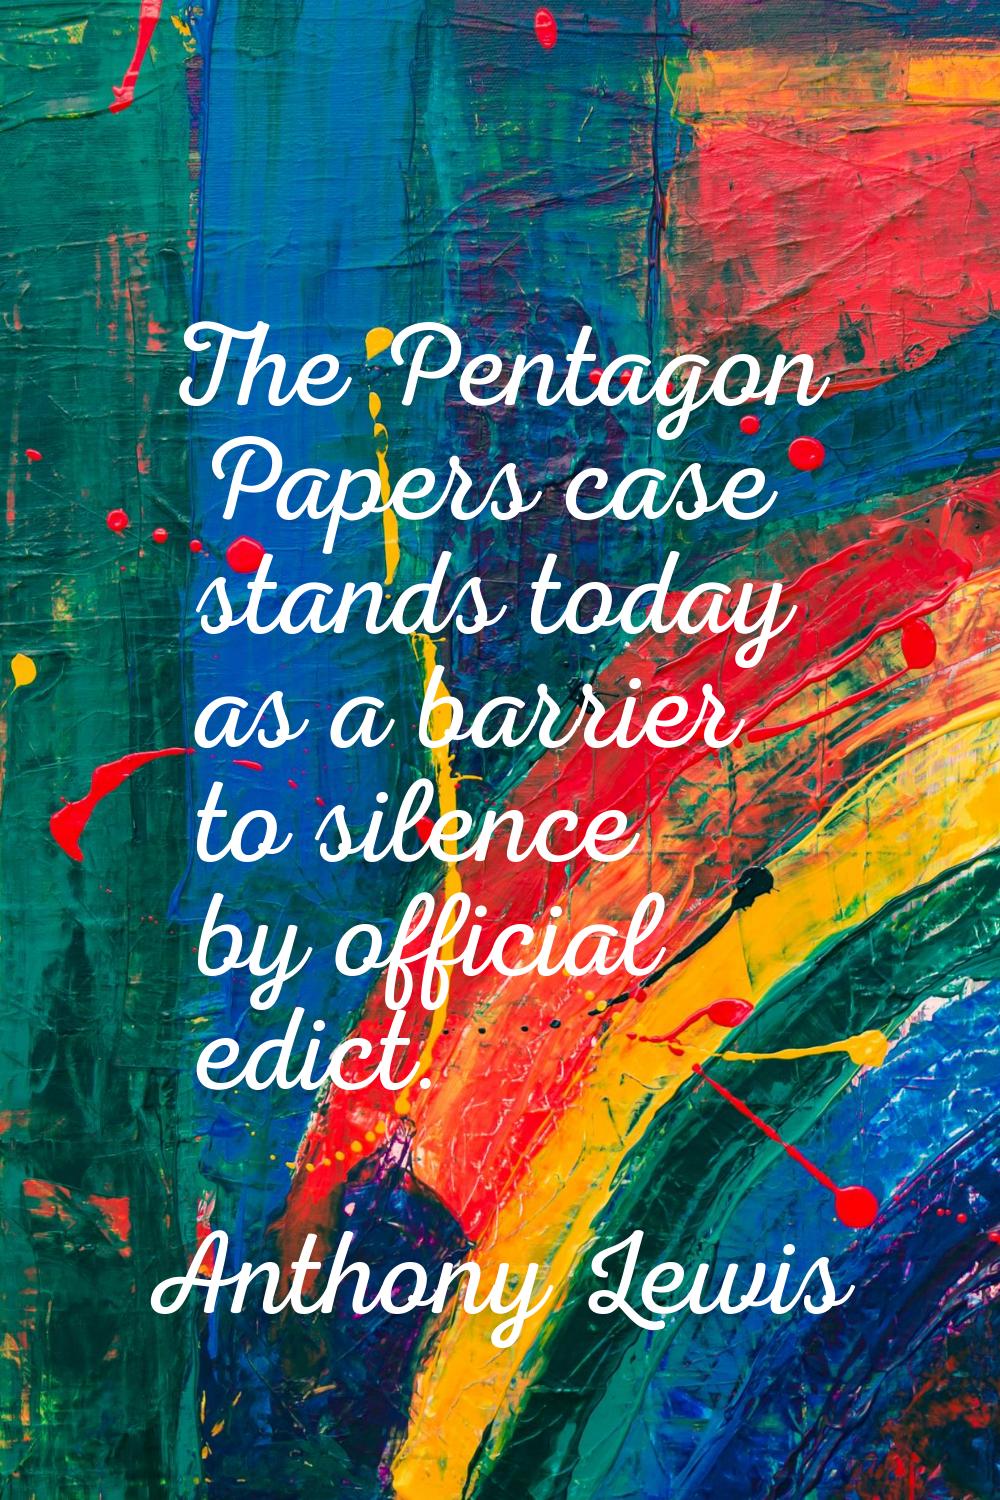 The Pentagon Papers case stands today as a barrier to silence by official edict.